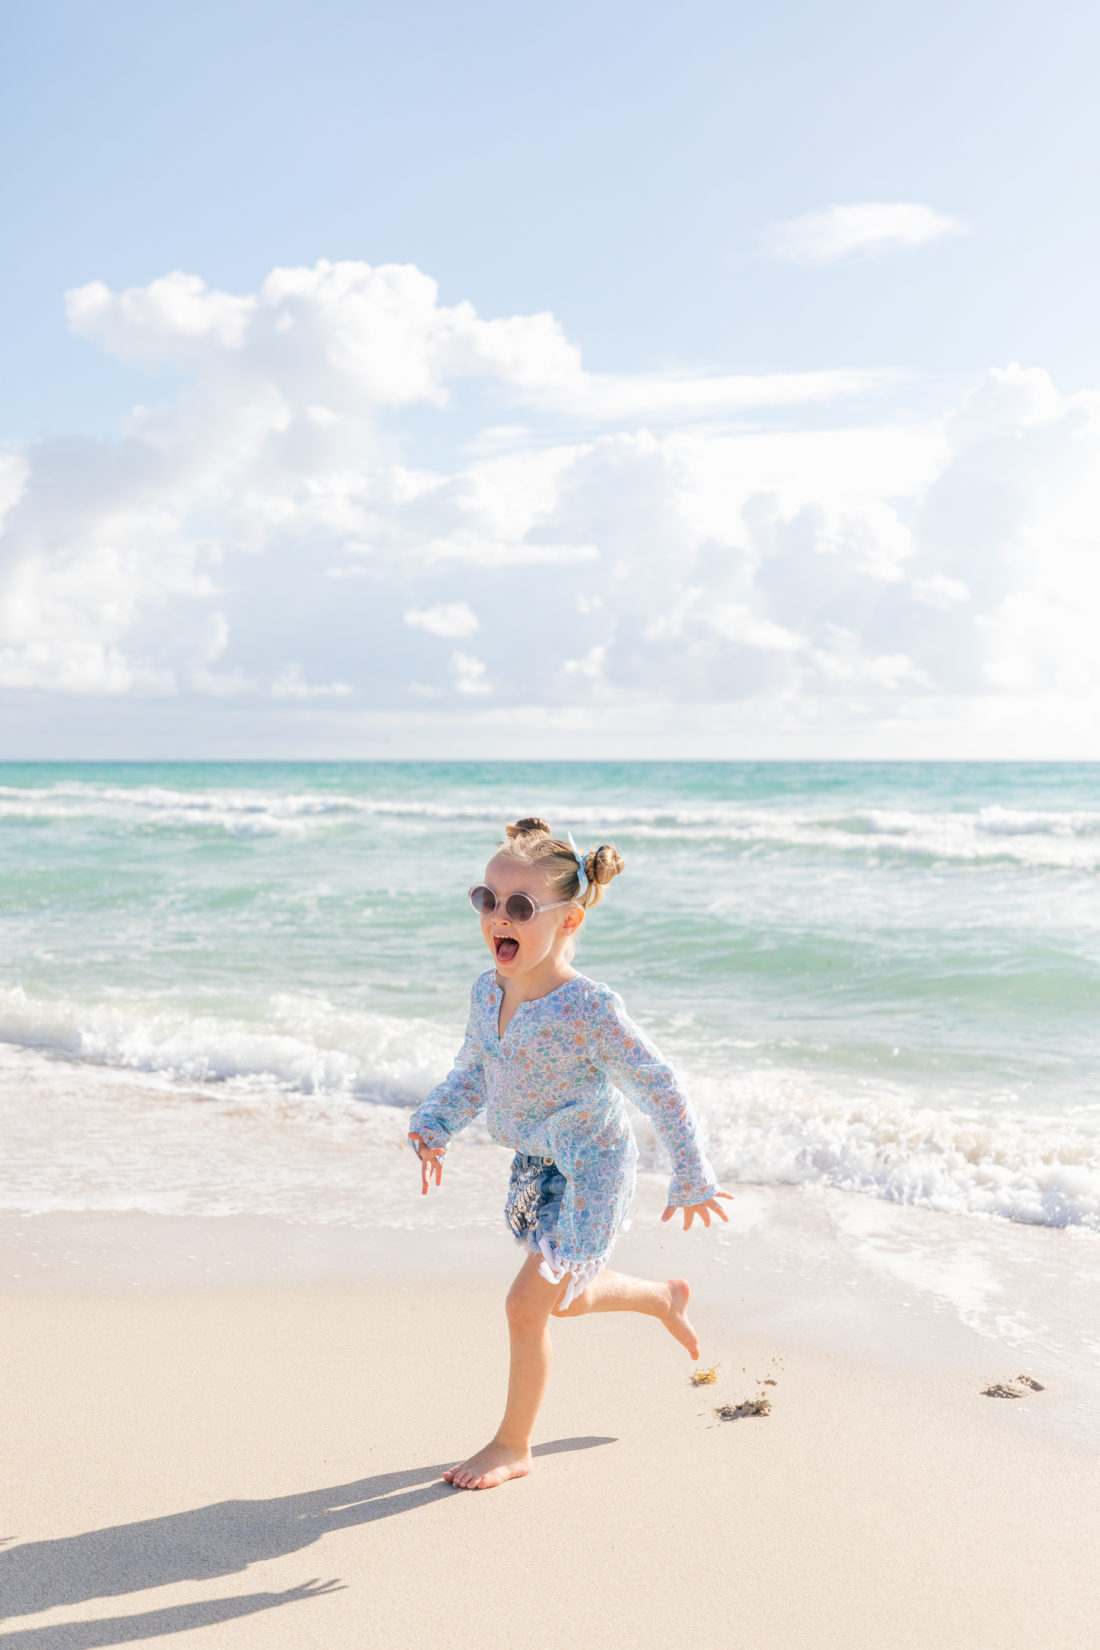 Marlowe Martino wears a blue, floral tunic from the Happily Eva After x Masala Baby capsule collection, and denim shorts, and frolics in the sand and surf beachside in Miami